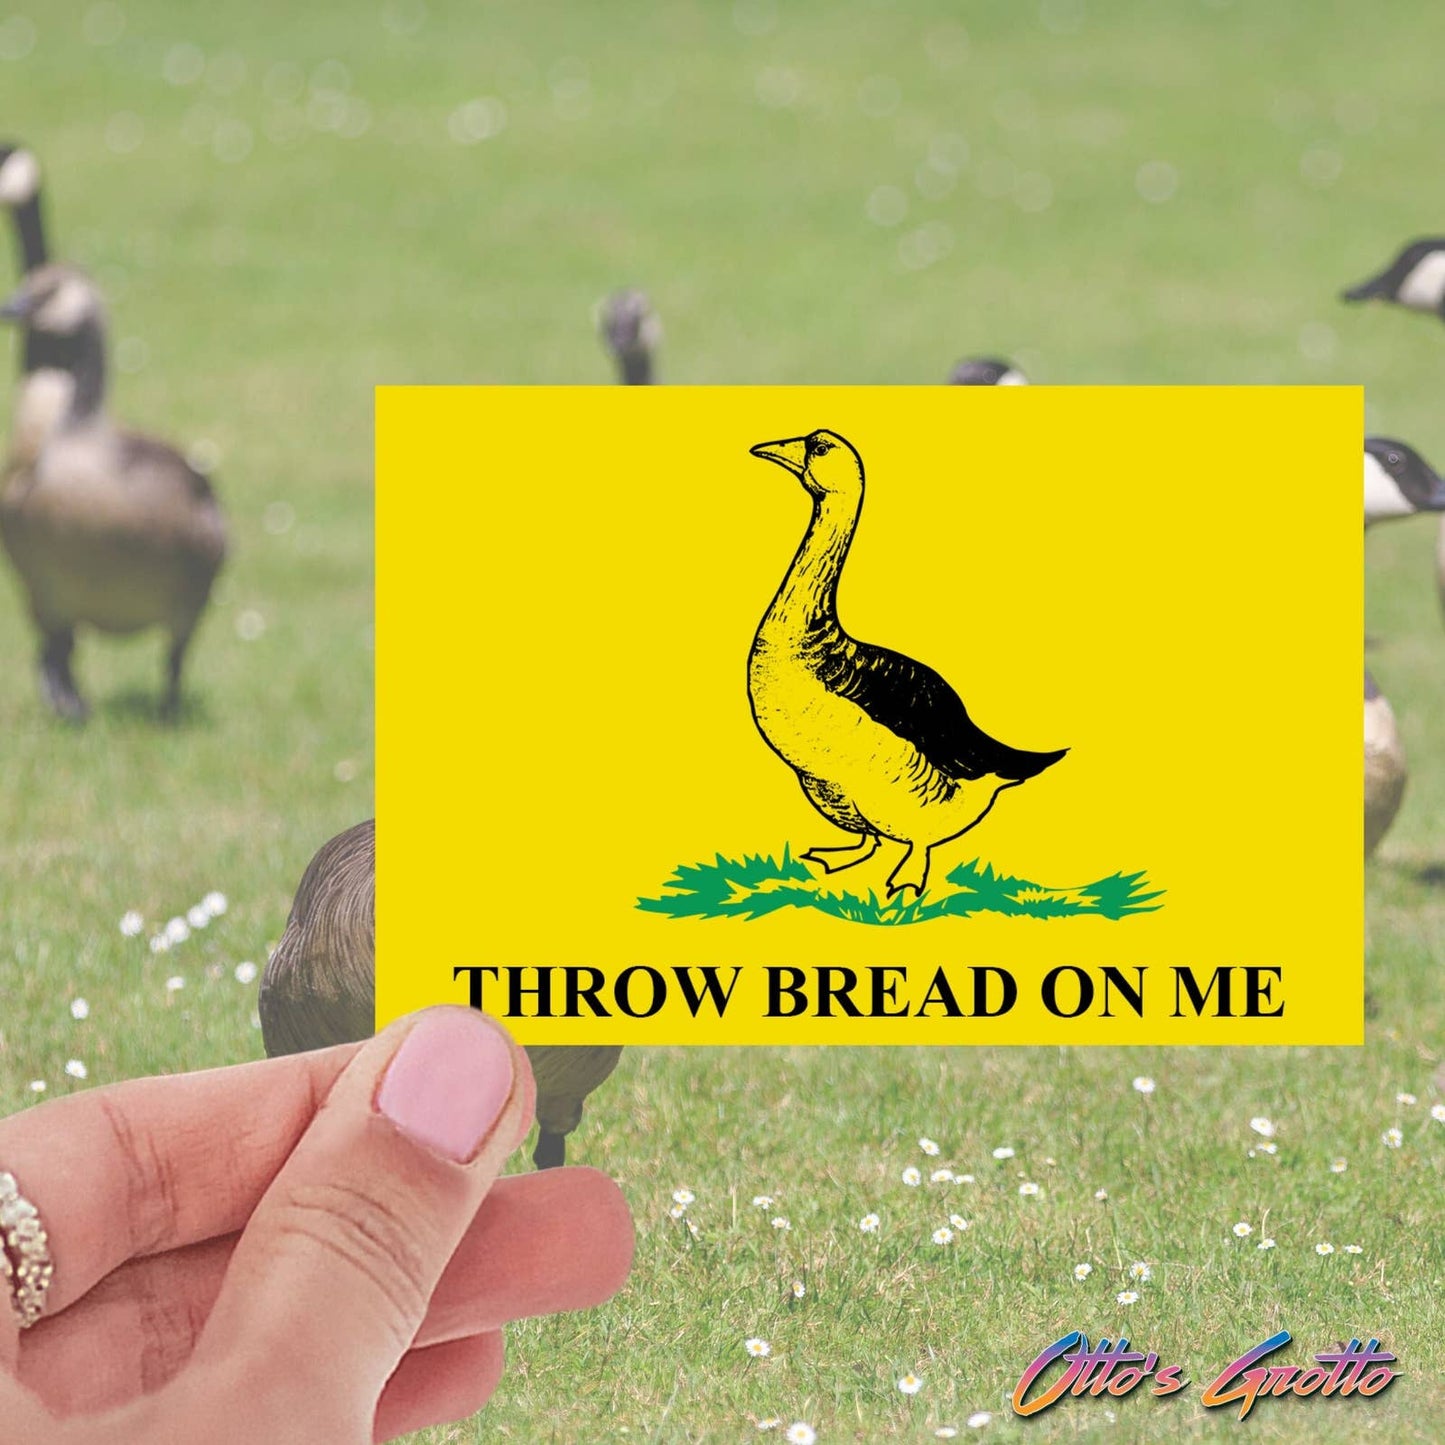 Throw Bread On Me Sticker, funny stickers, stickers for laptop, stickers for book, Don't Tread stickers, water bottle stickers, aesthetic